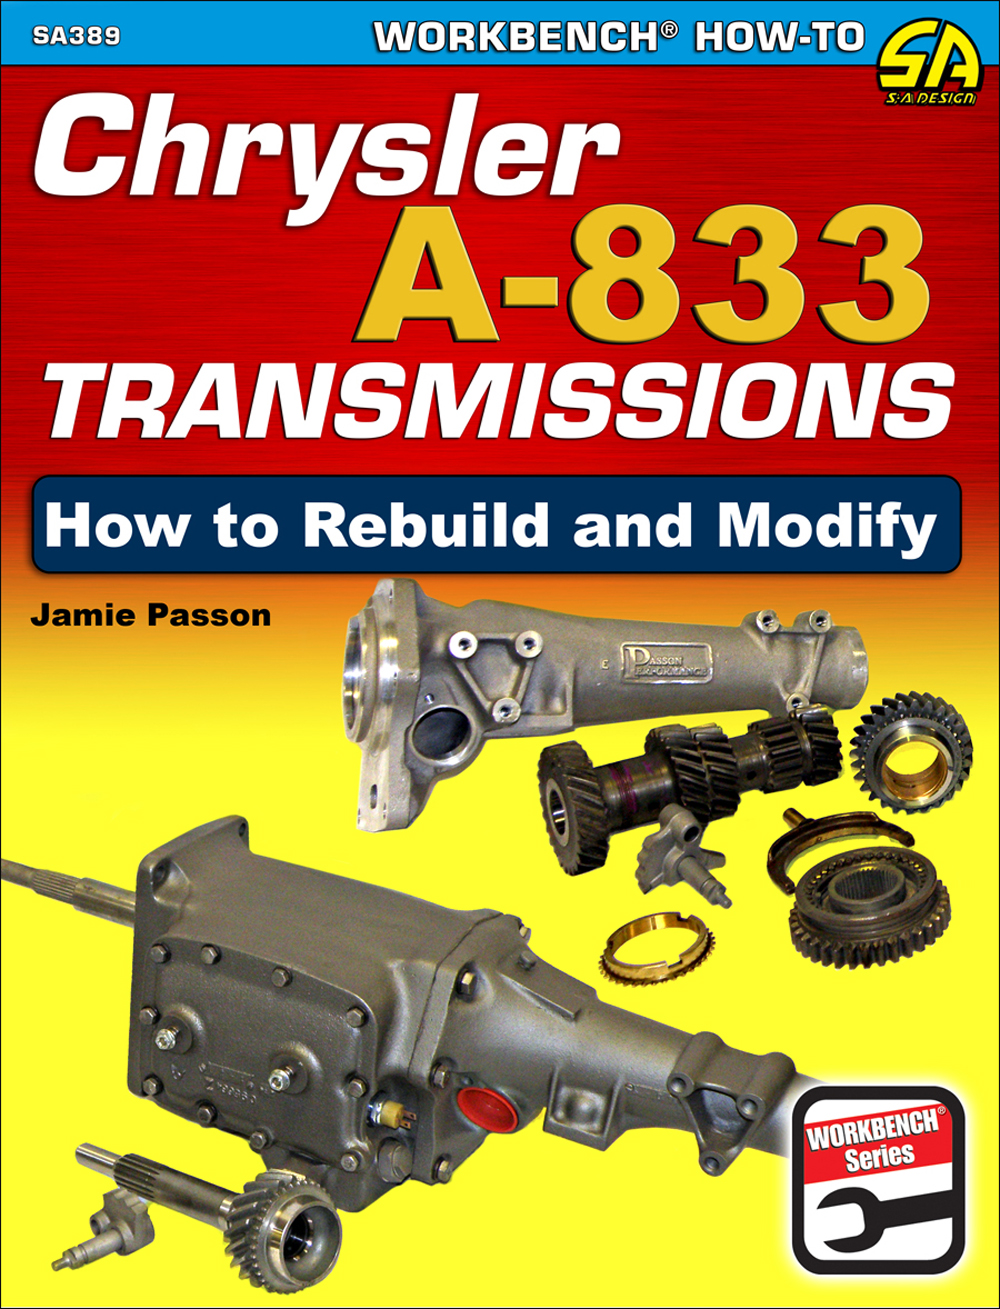 How to Rebuild and Modify Chrysler A-833 Transmissions 1964-1987